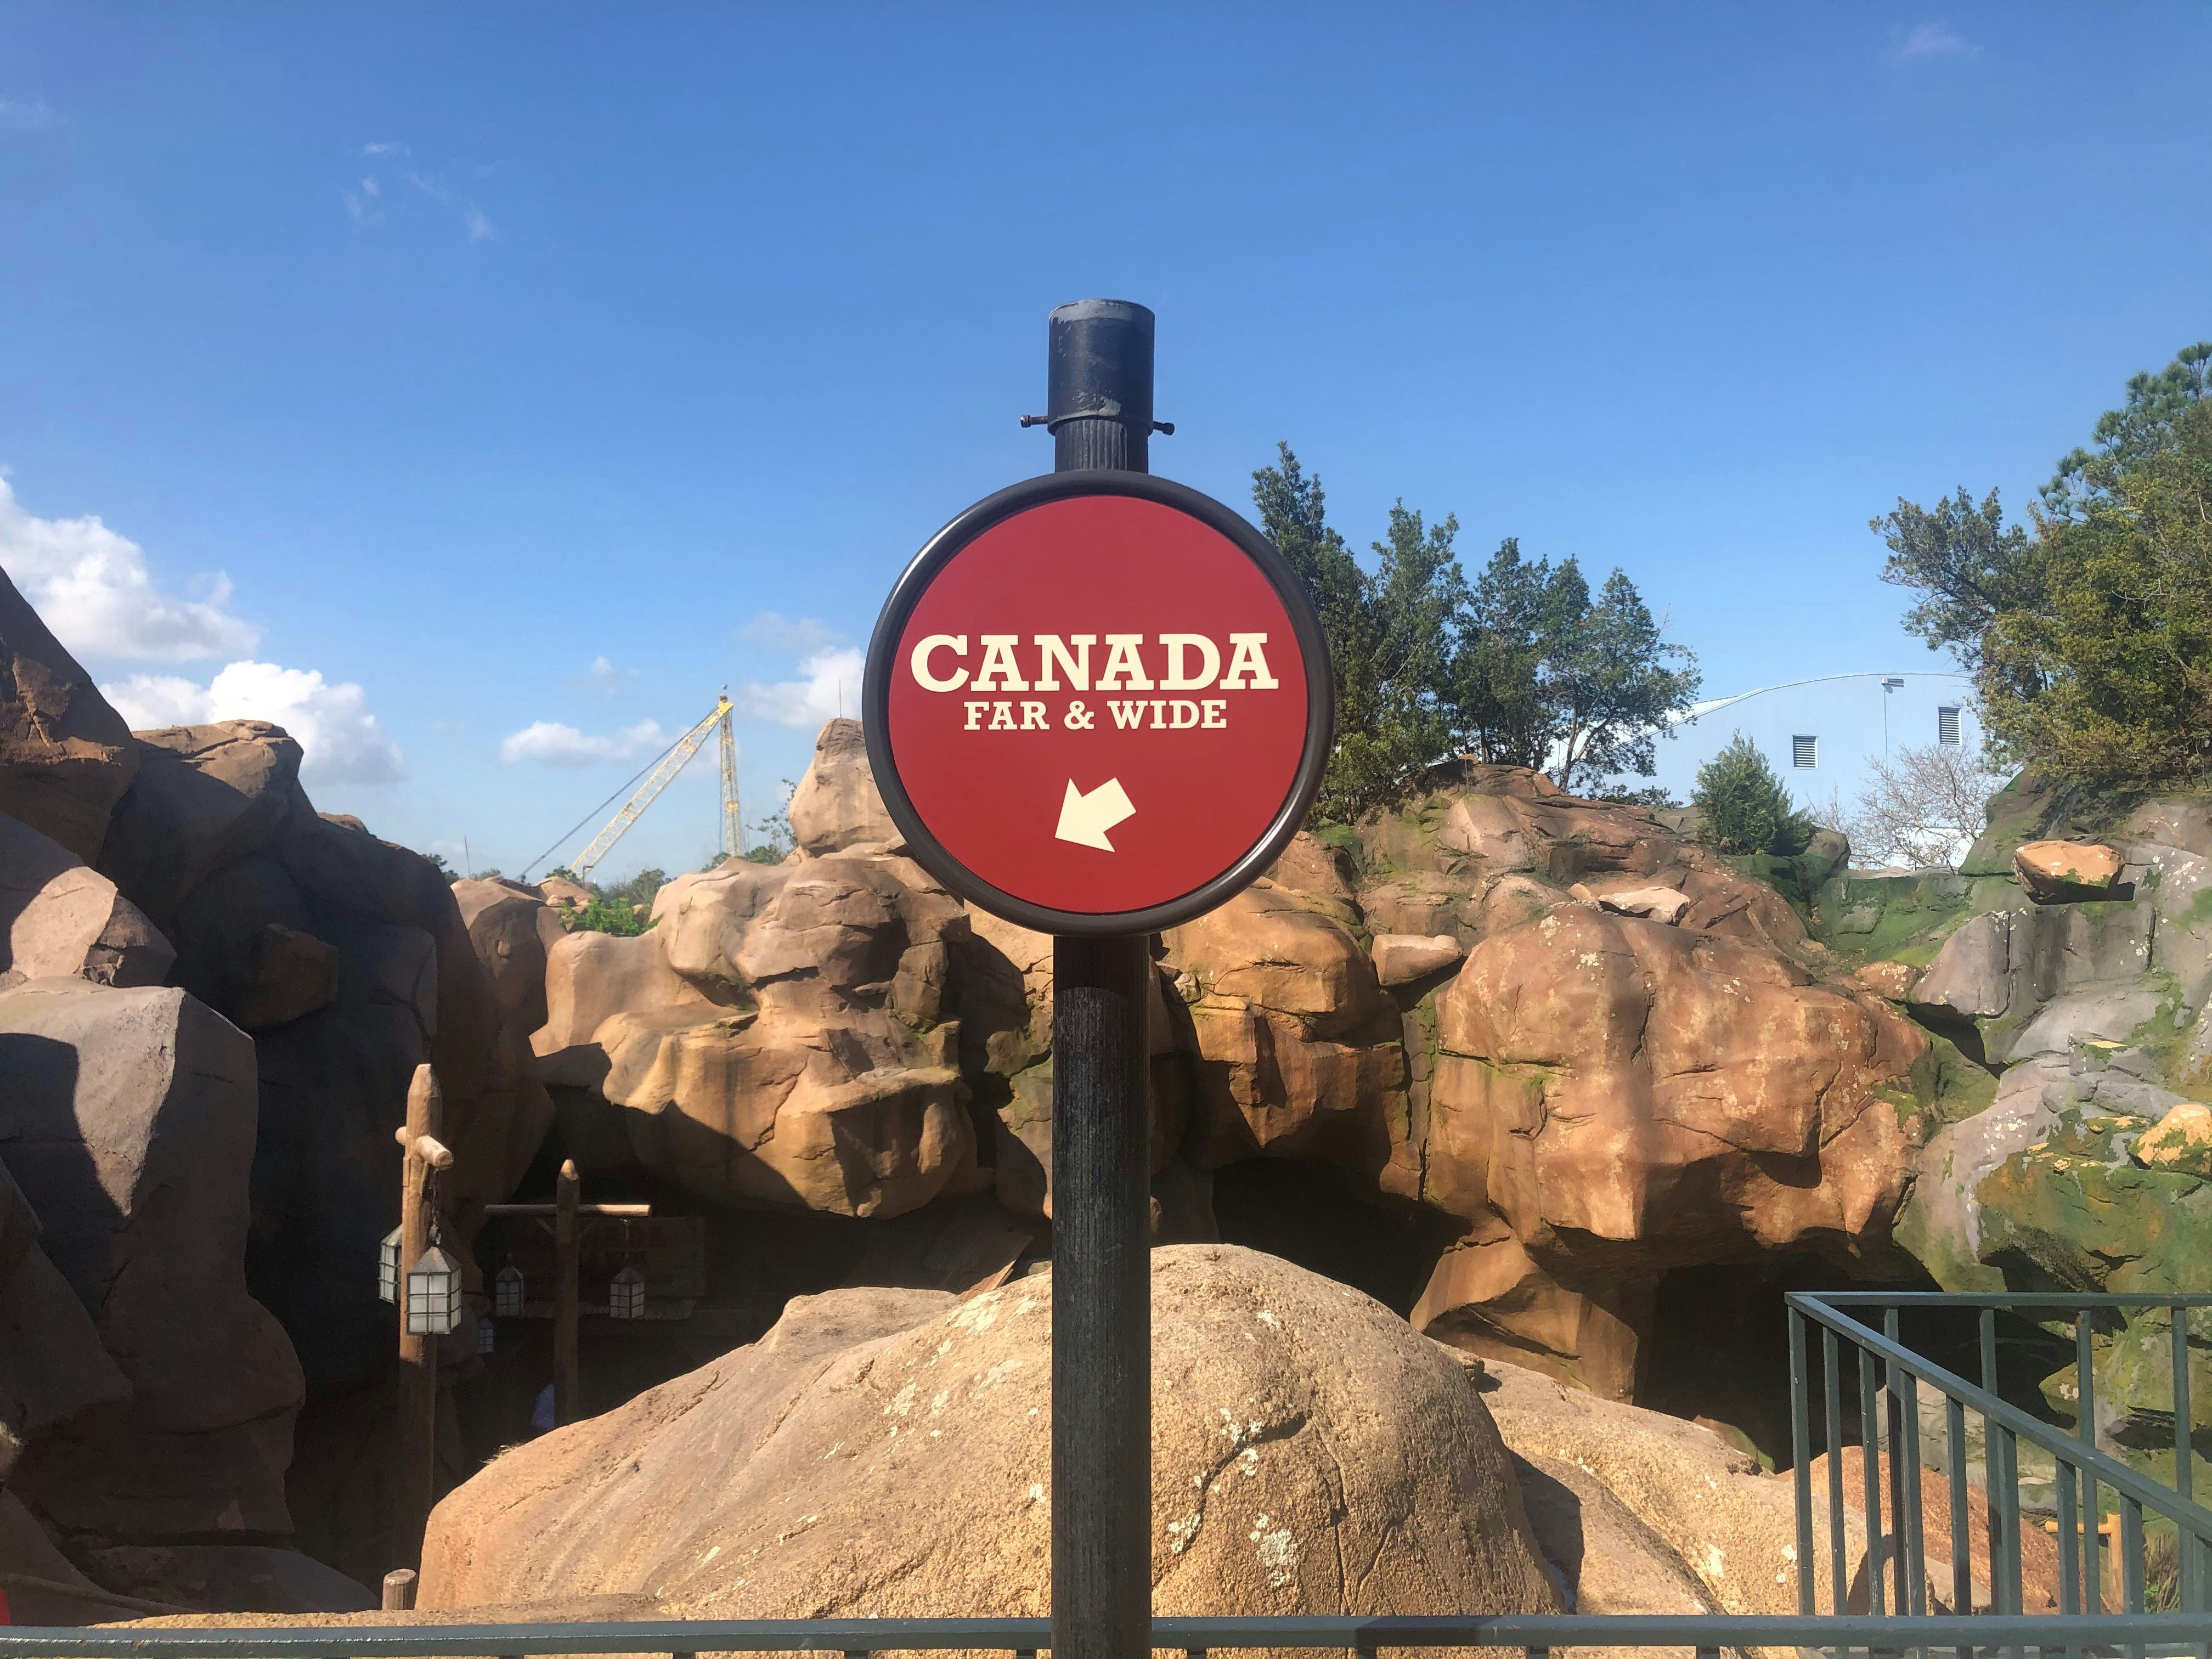 Canada Far and Wide in Circle Vision 360 signage jan 2020 3.jpg?auto=compress%2Cformat&ixlib=php 1.2